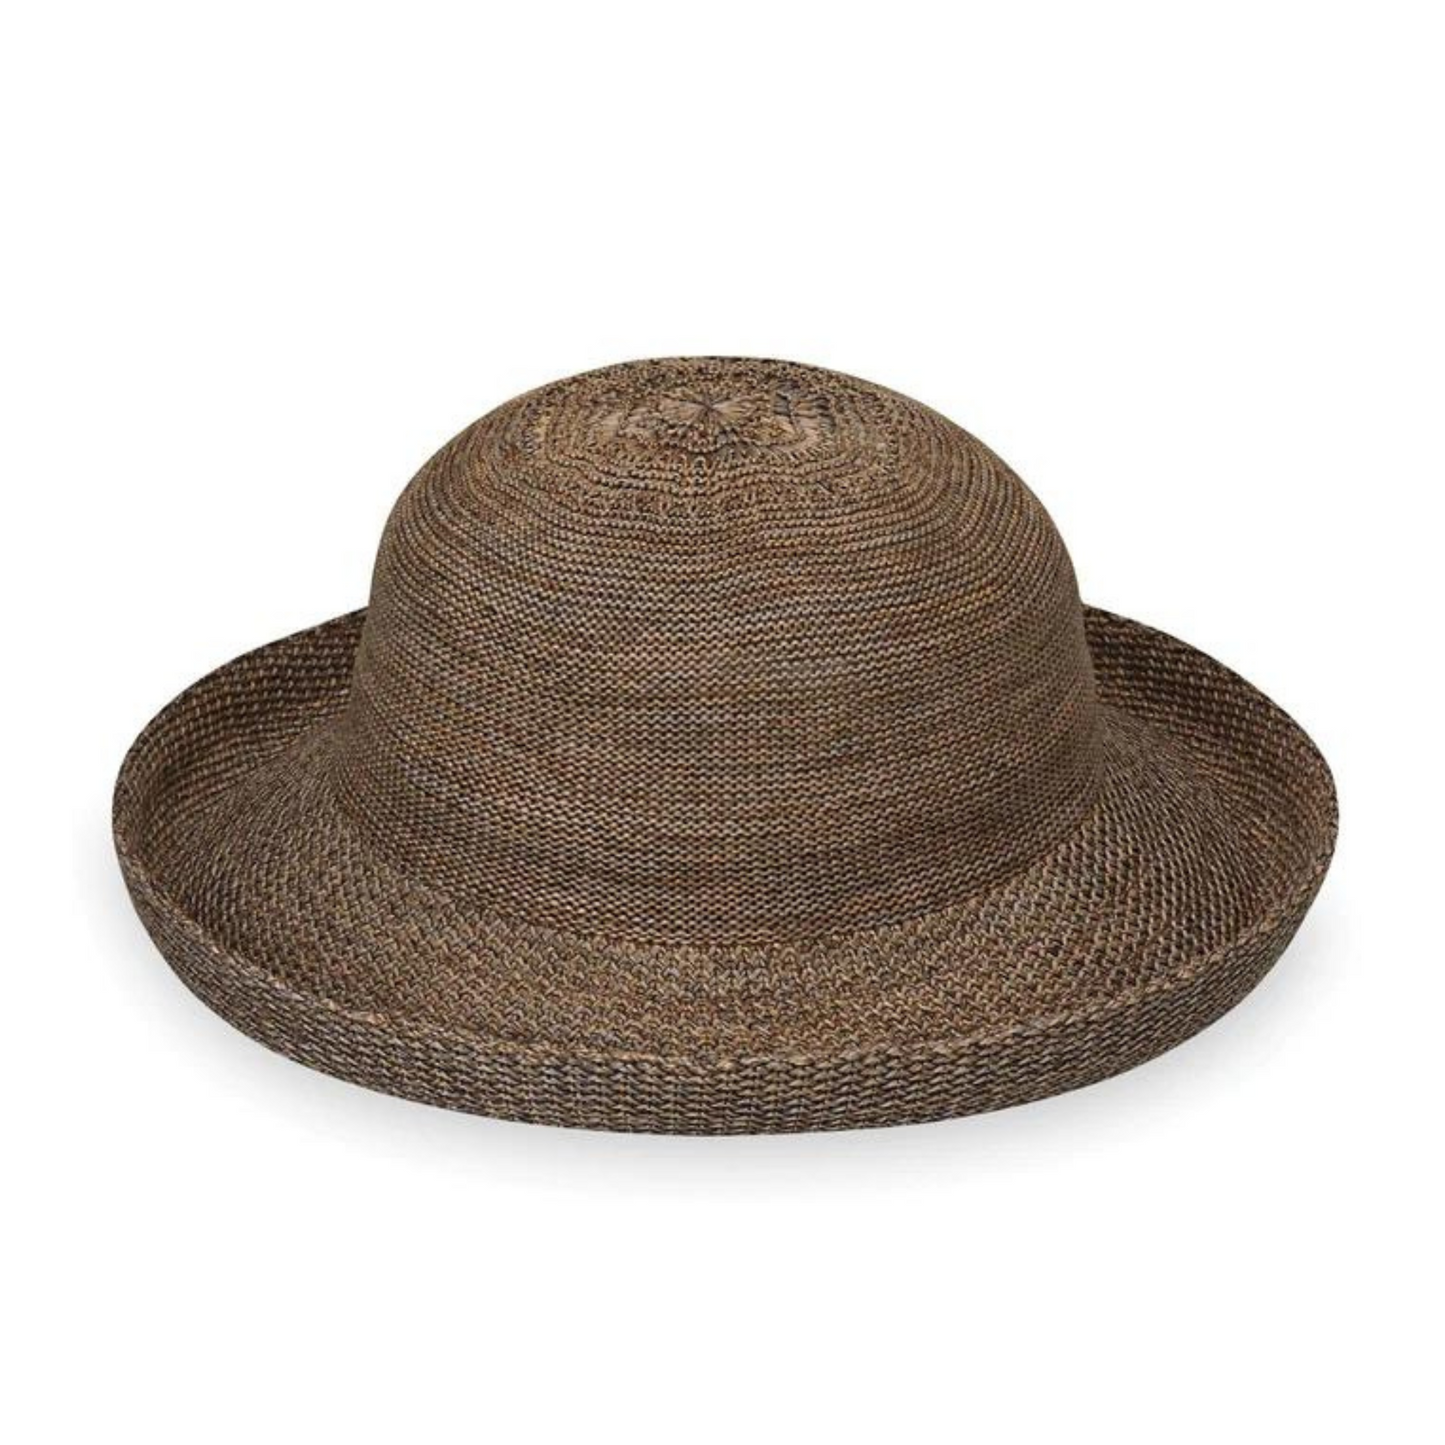 A front view of a dark brown weaved sunhat.